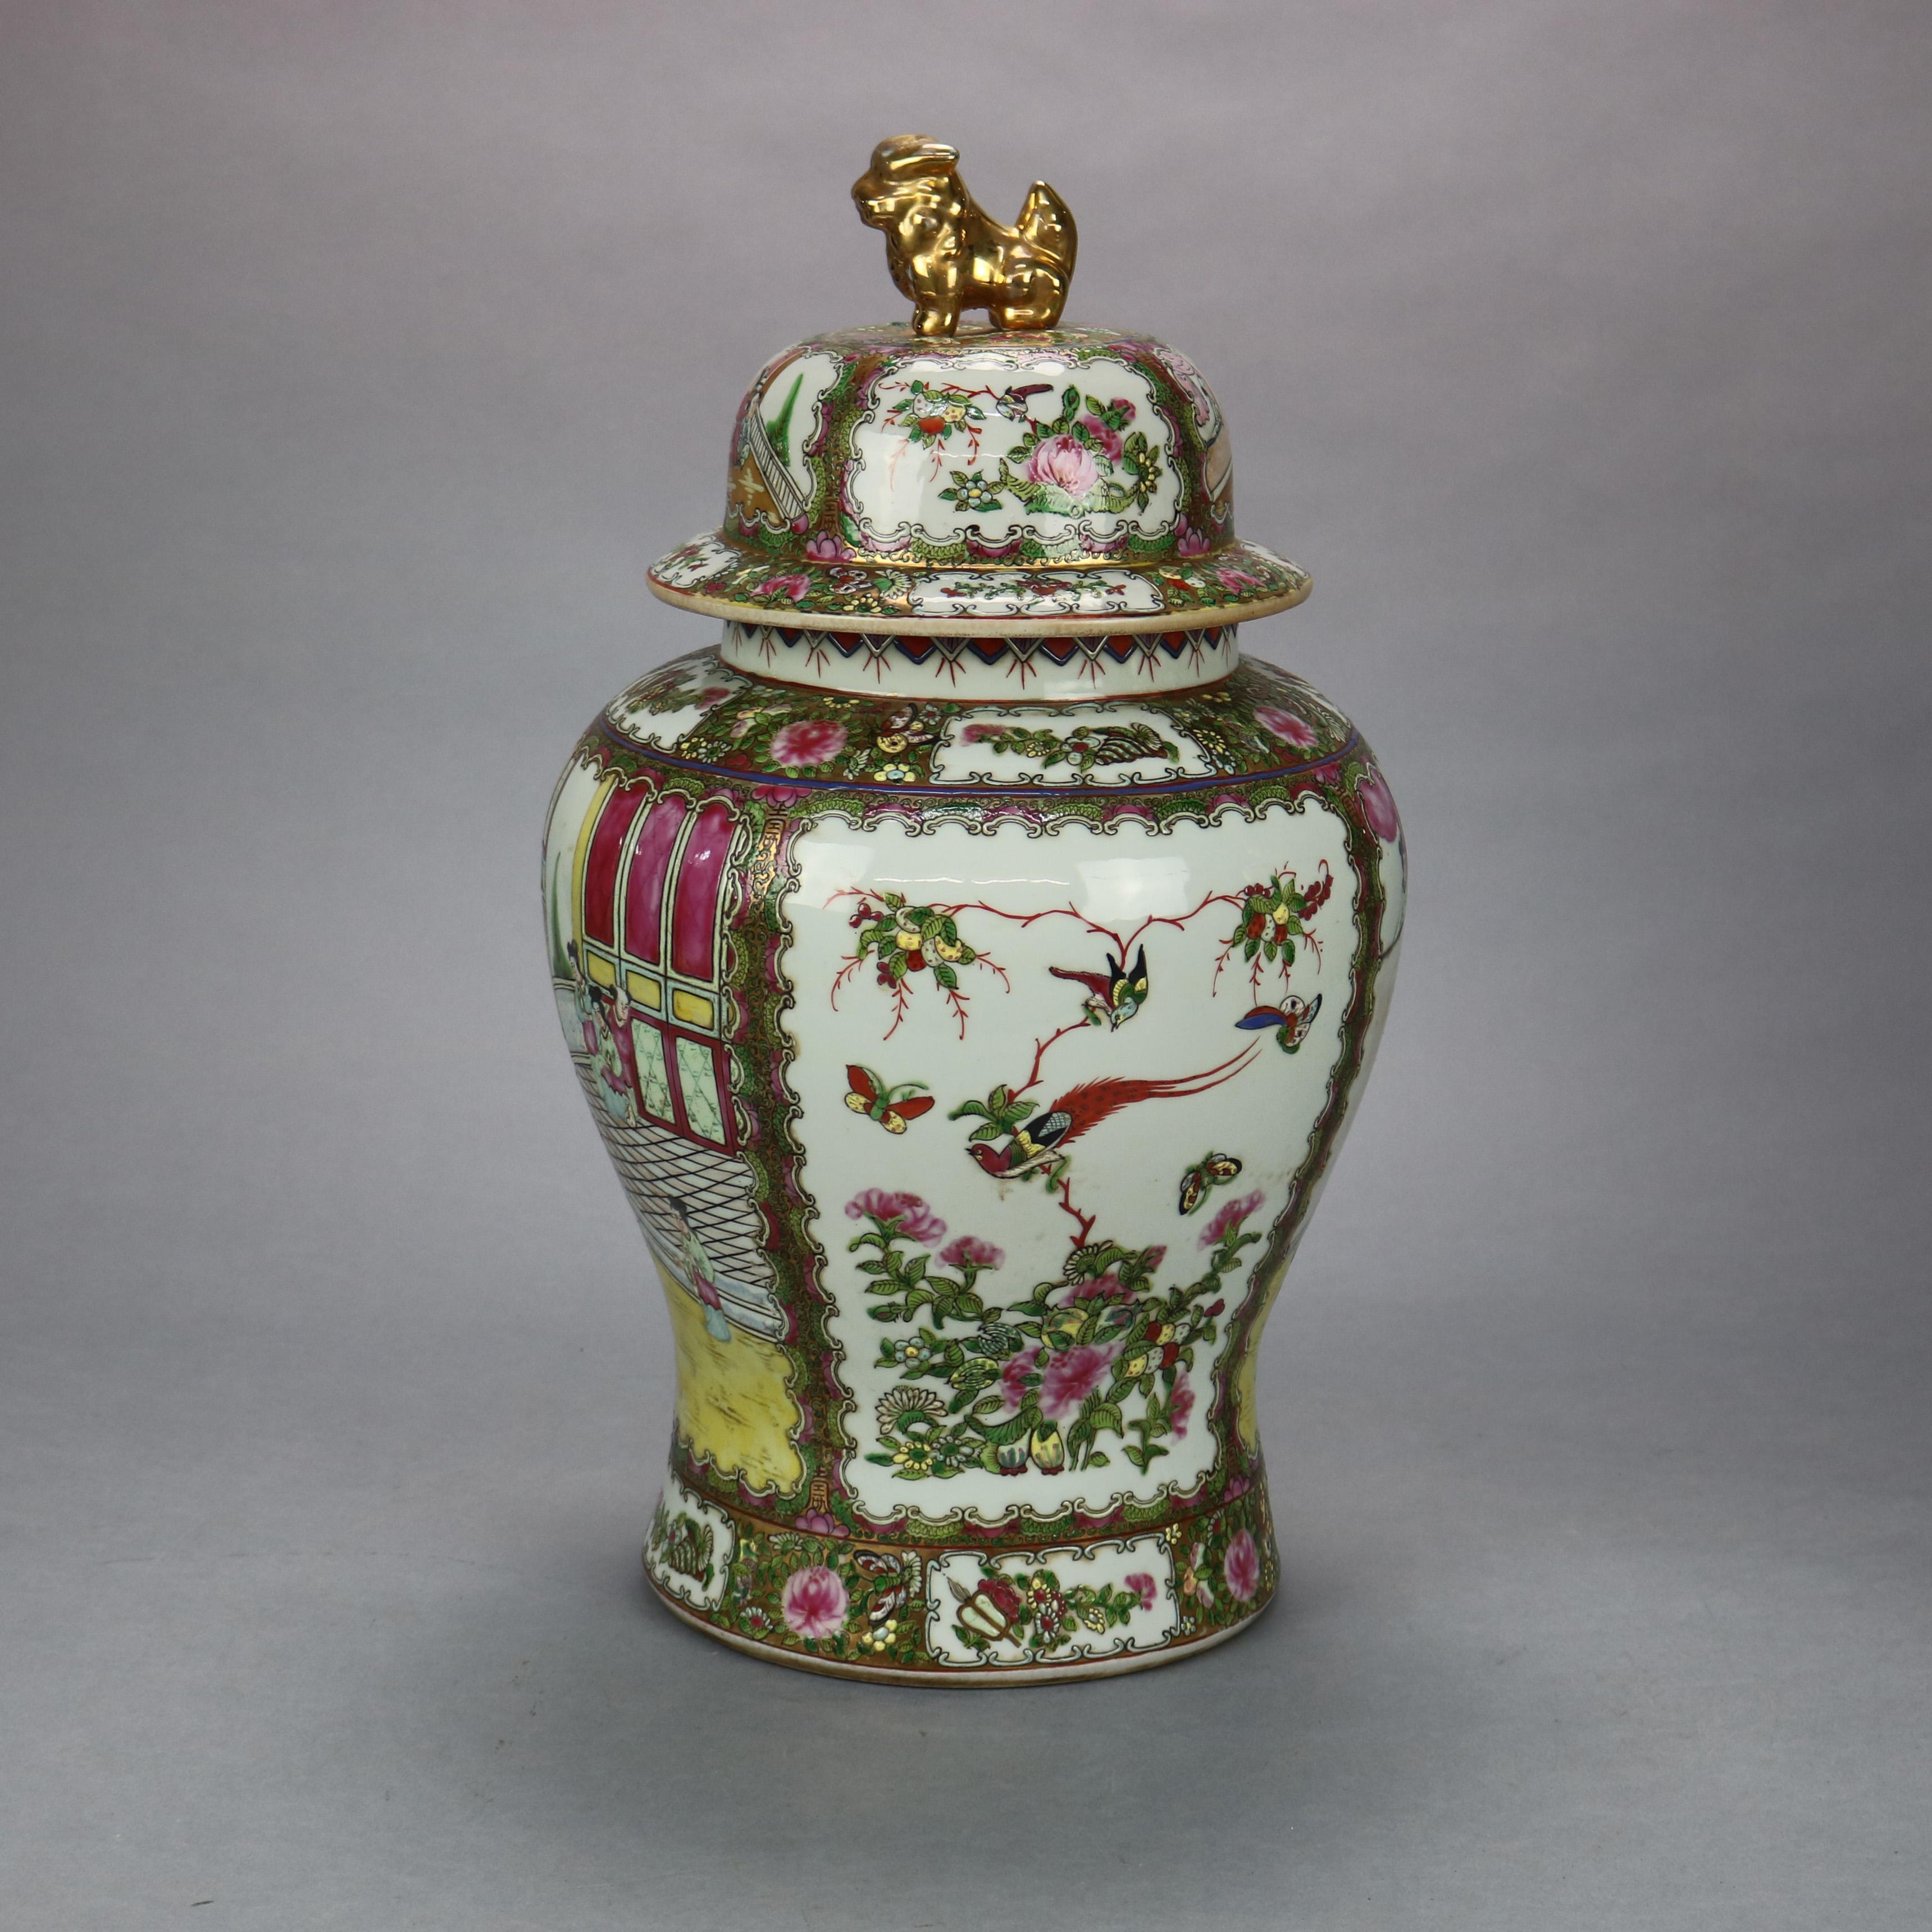 An antique pair of large Chinese ginger jars offer enamel decorated porcelain construction with genre and garden scenes and having lids with figural foo dog finials, gilt highlights throughout, stamped on bases as photographed, 20th